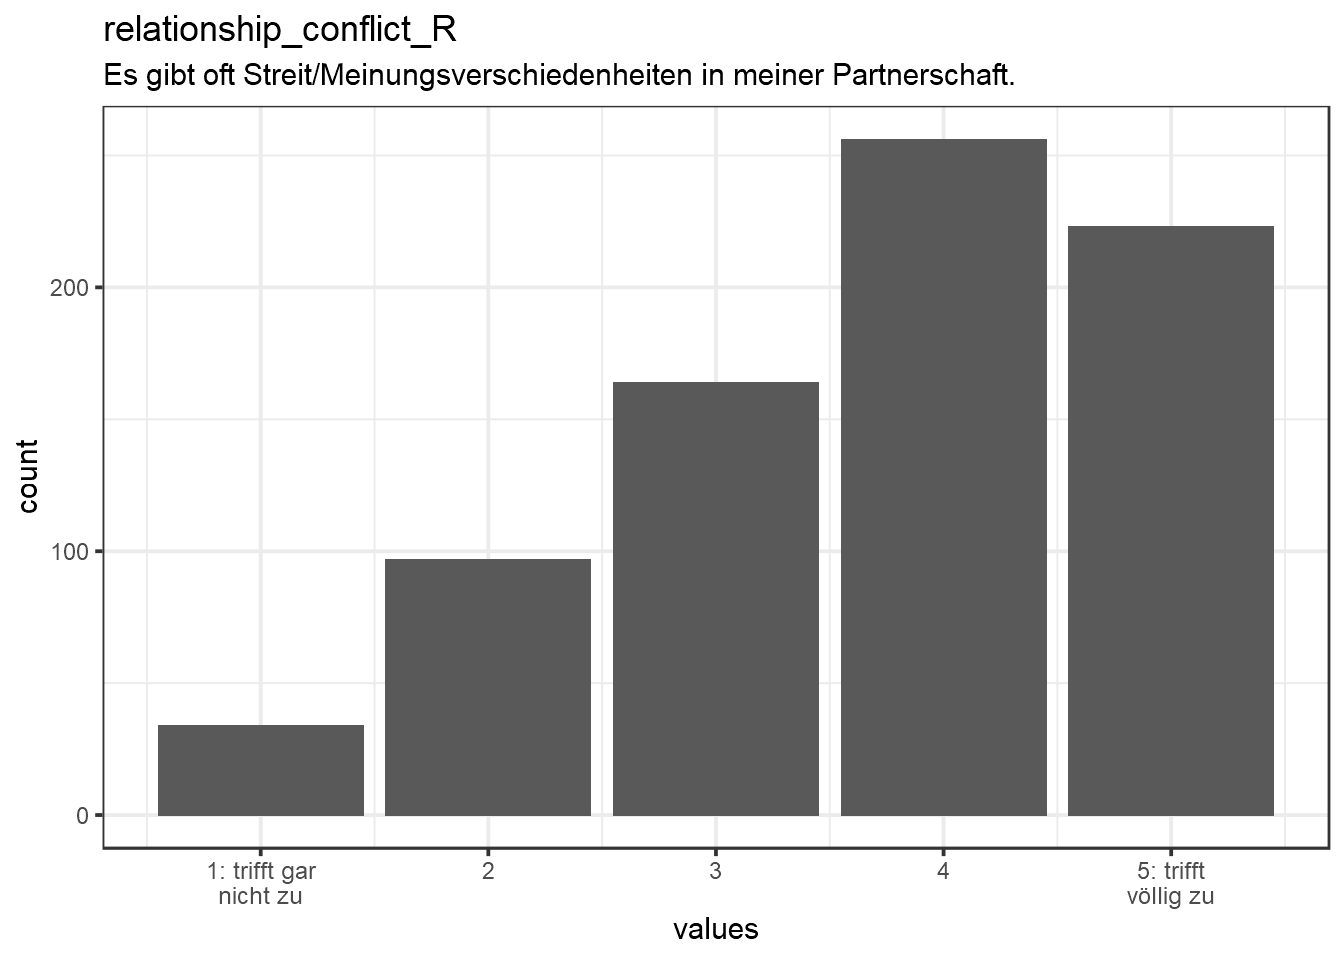 Distribution of values for relationship_conflict_R